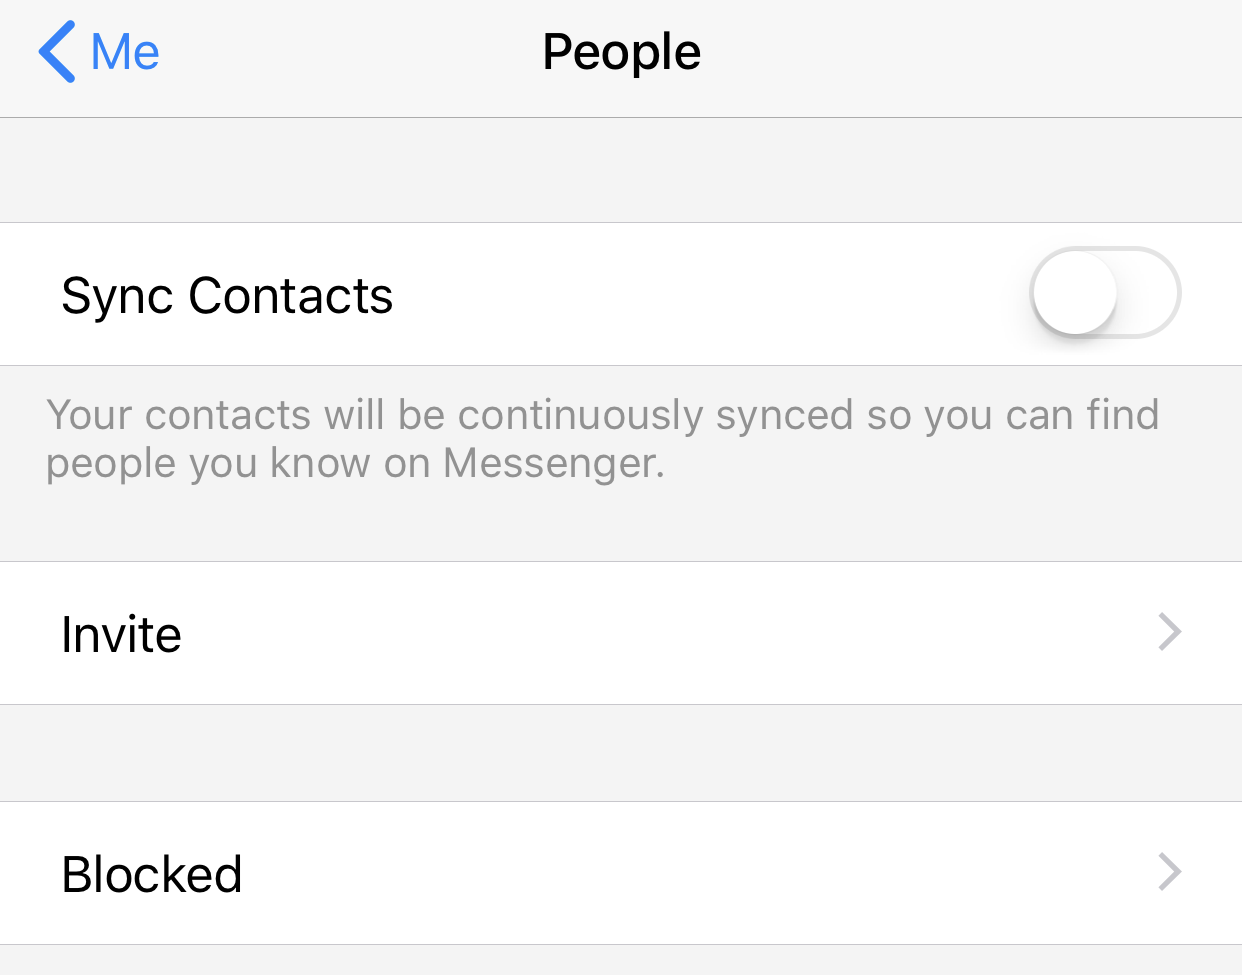 How To Delete Your Phone Contacts From Facebook